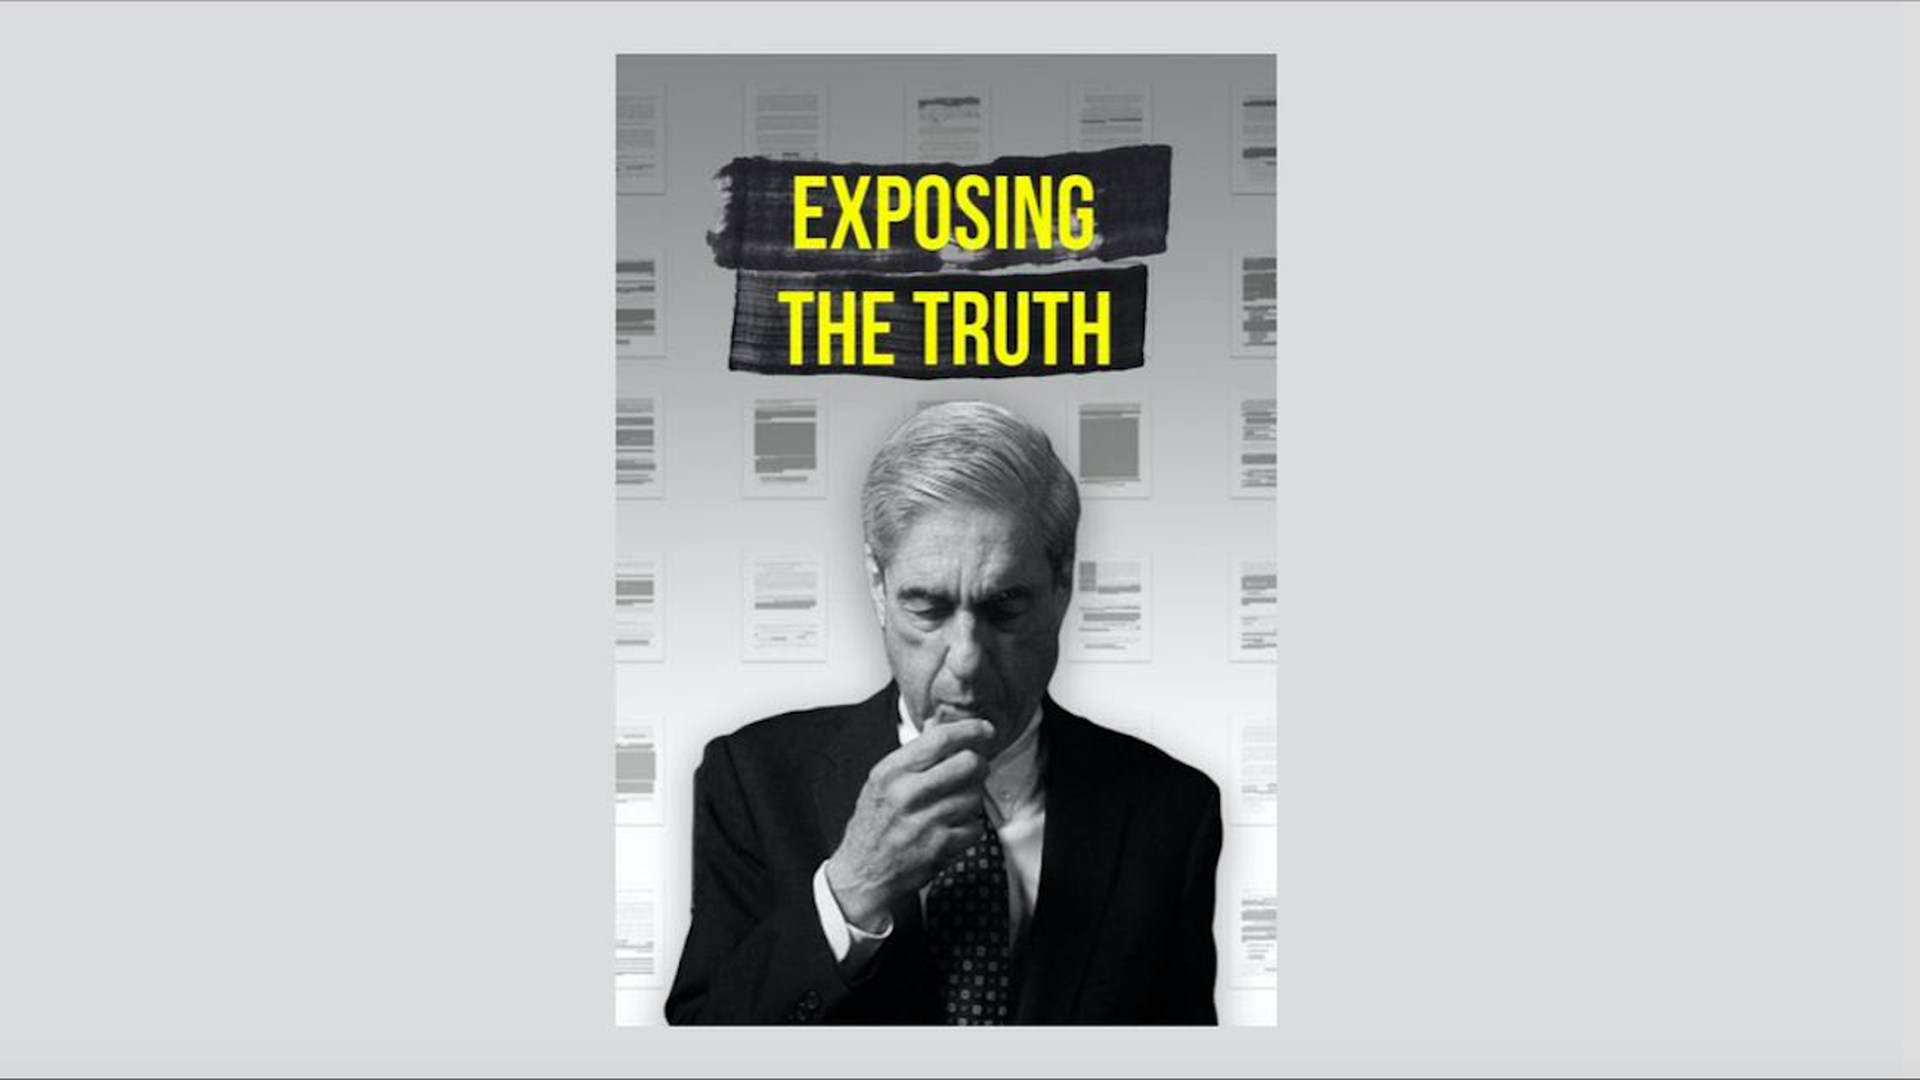 Cover that reads "exposing the truth" with a black and white photo of Robert Mueller